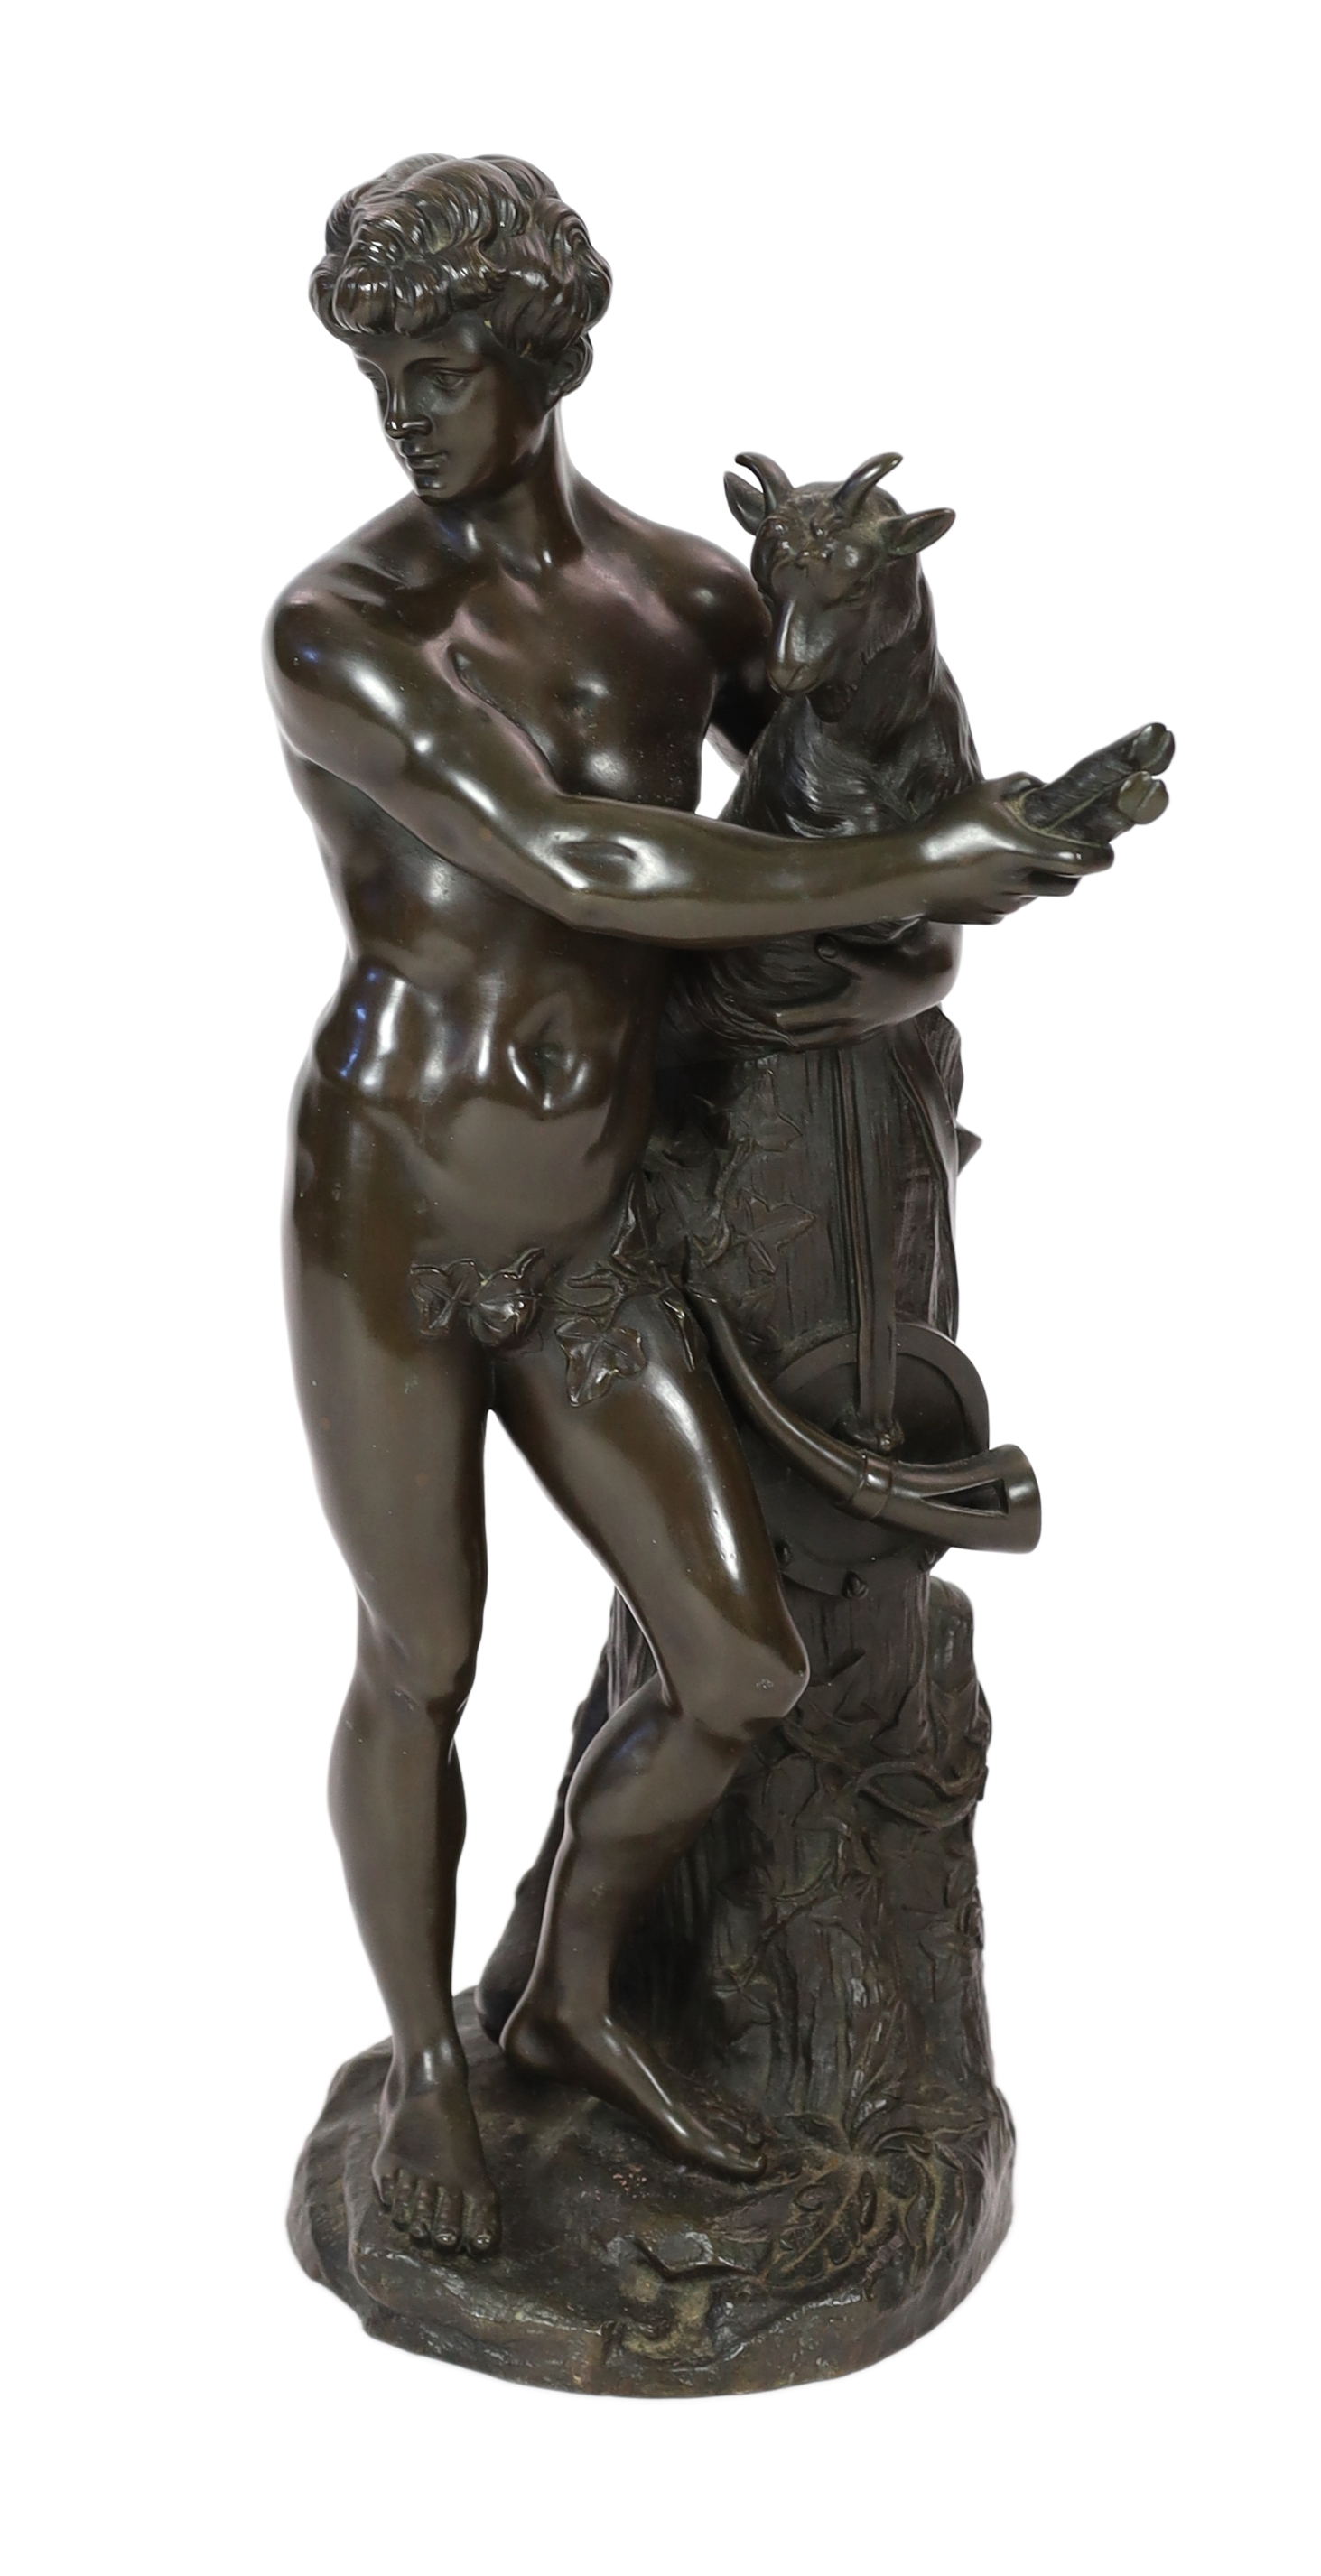 A bronze figure of Bacchus with a goat, 65cm high                                                                                                                                                                           